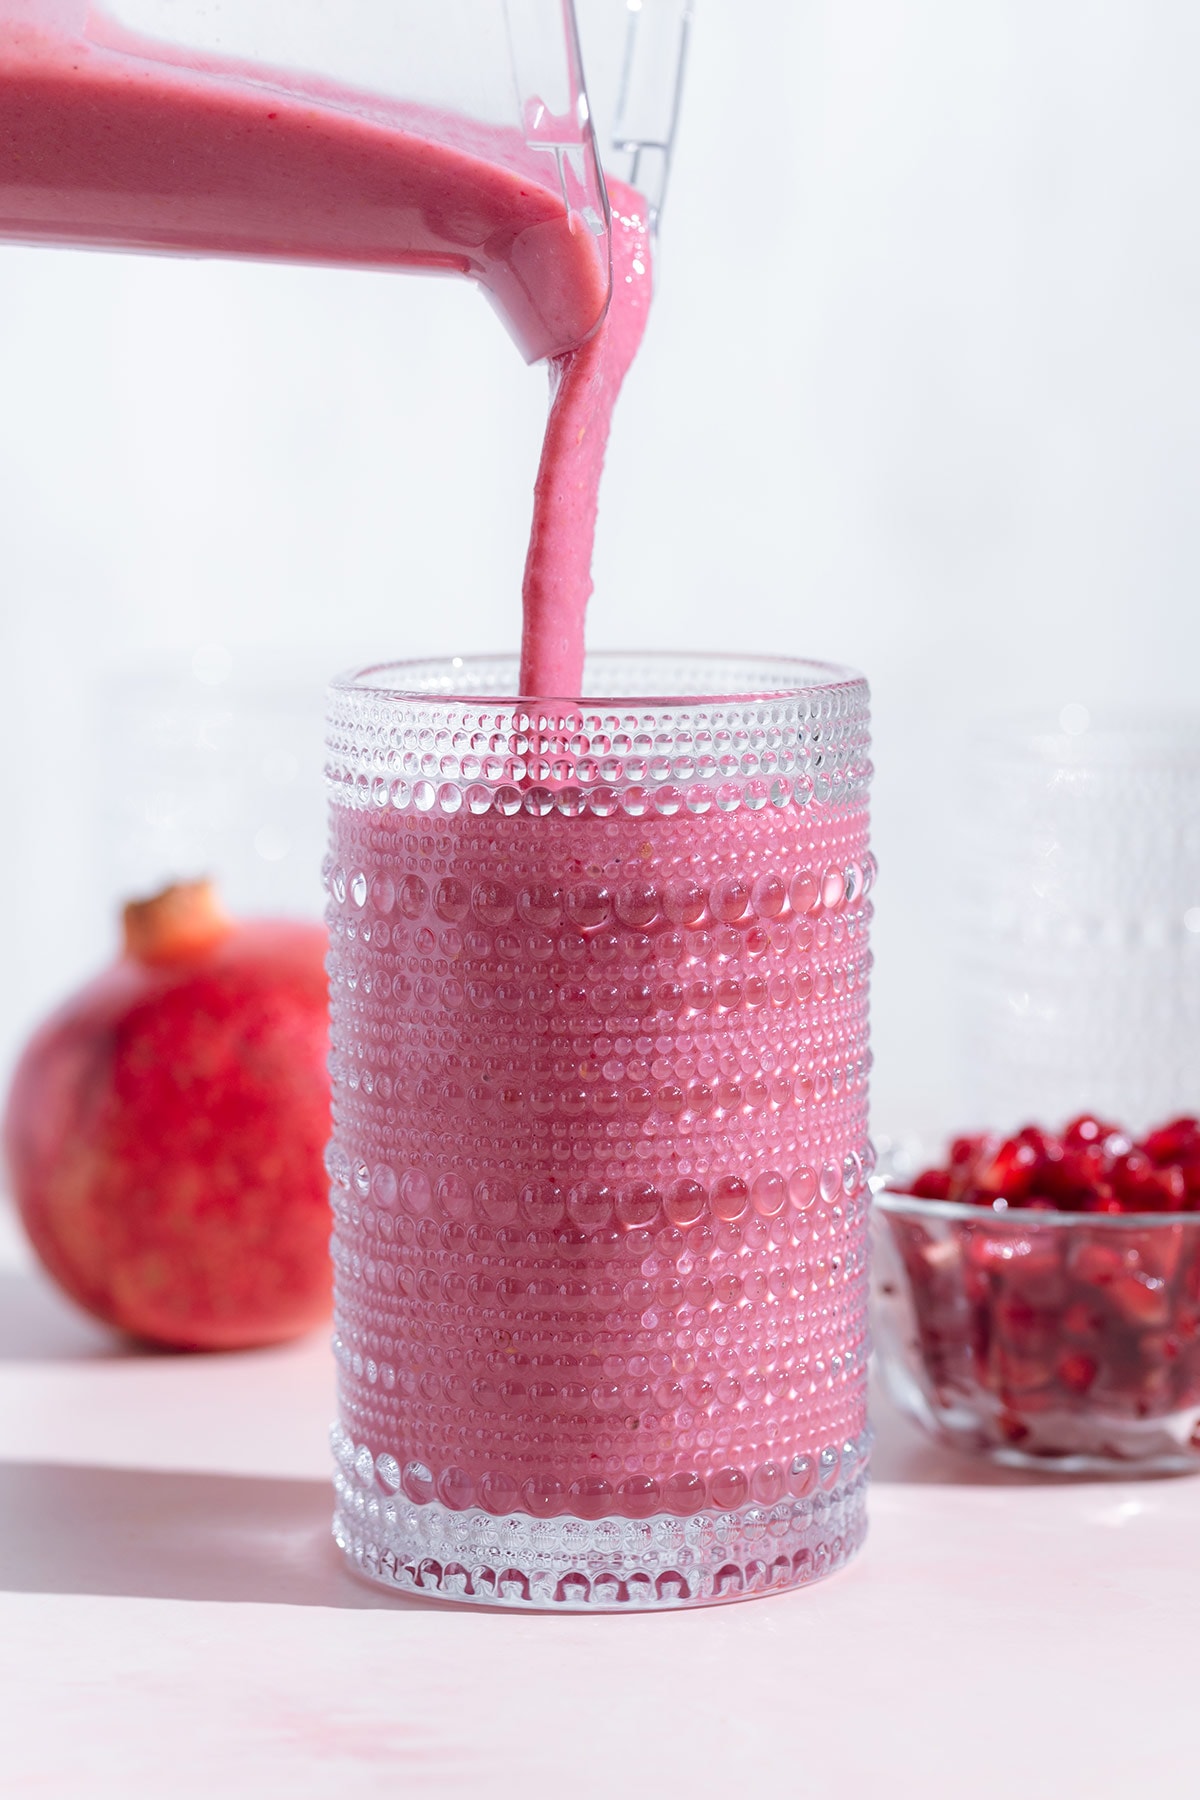 Pink smoothie being poured into a tall glass on a white and pink background.